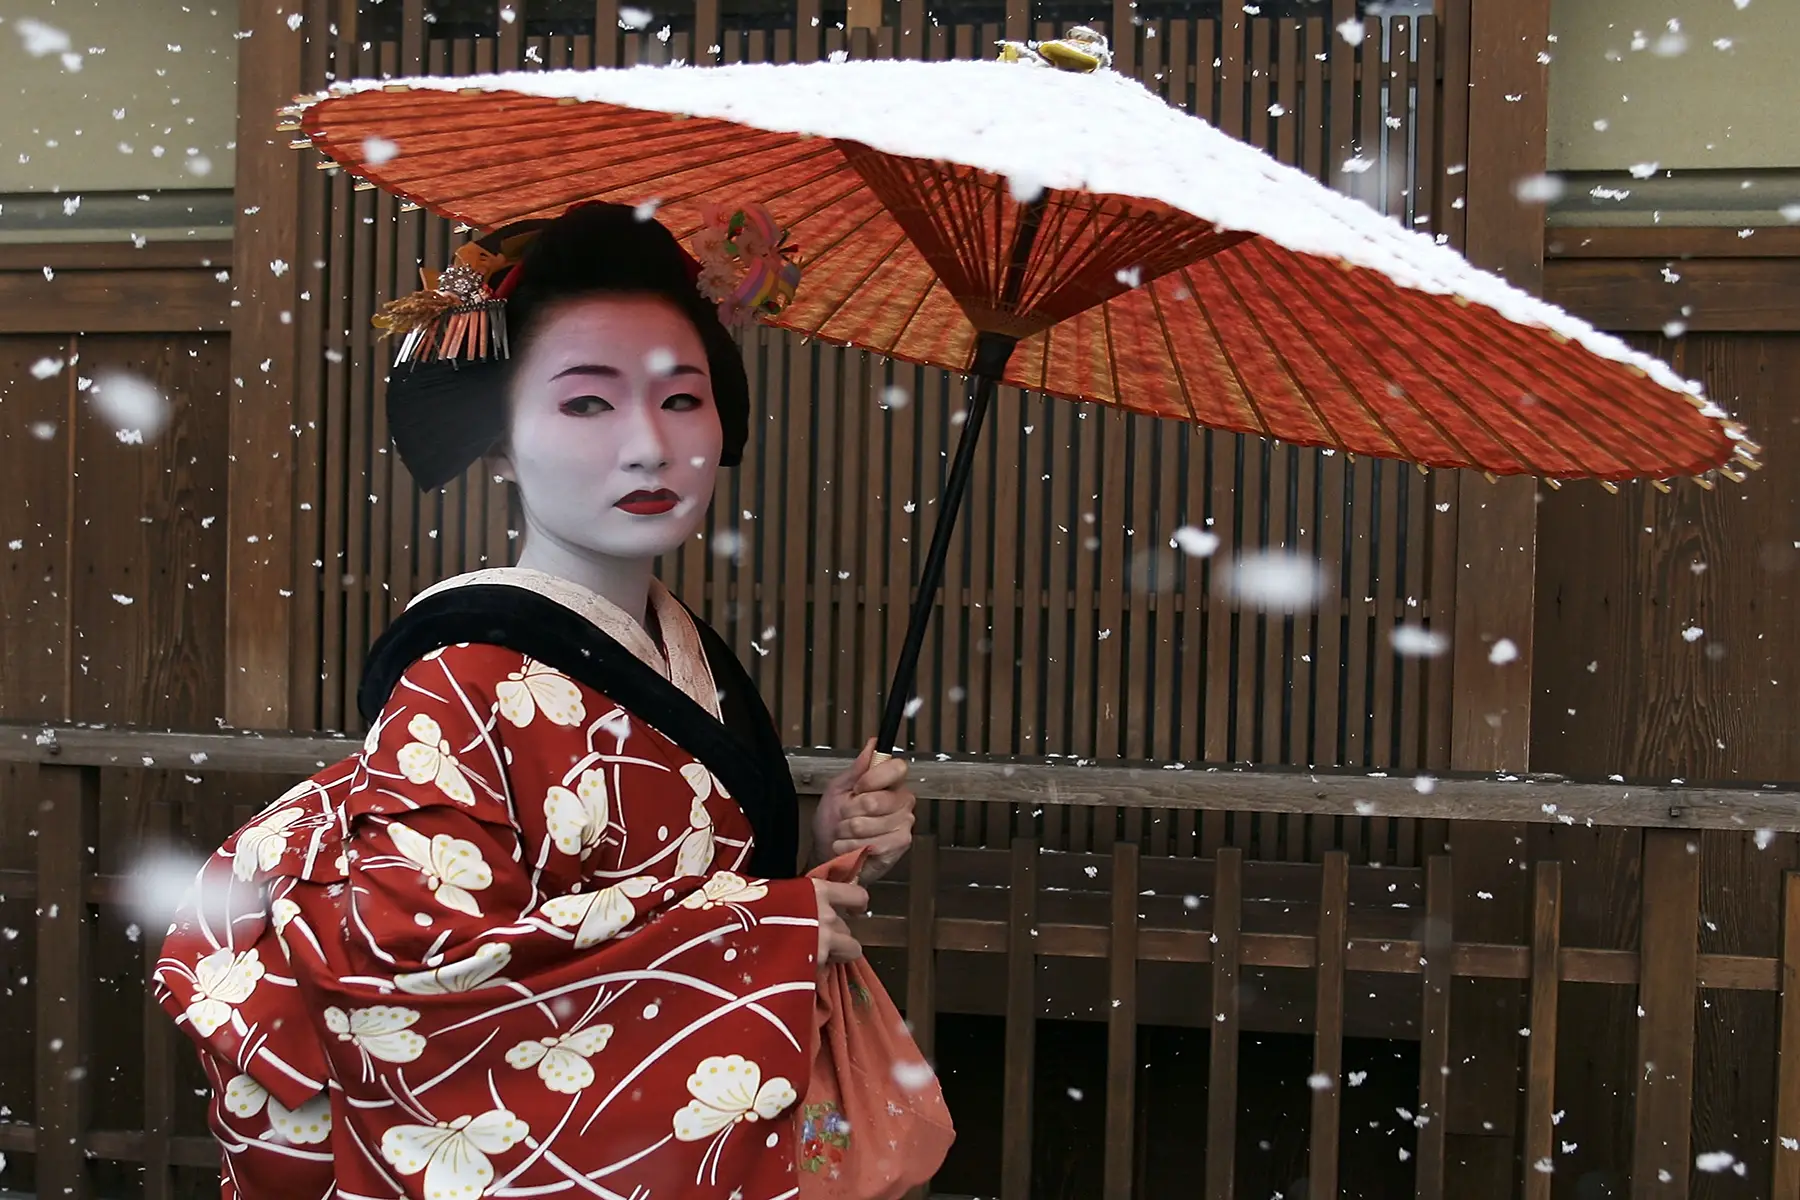 A Maiko, a traditional Japanese dancer, walks in the snow in Gion, Kyoto's famous geisha district